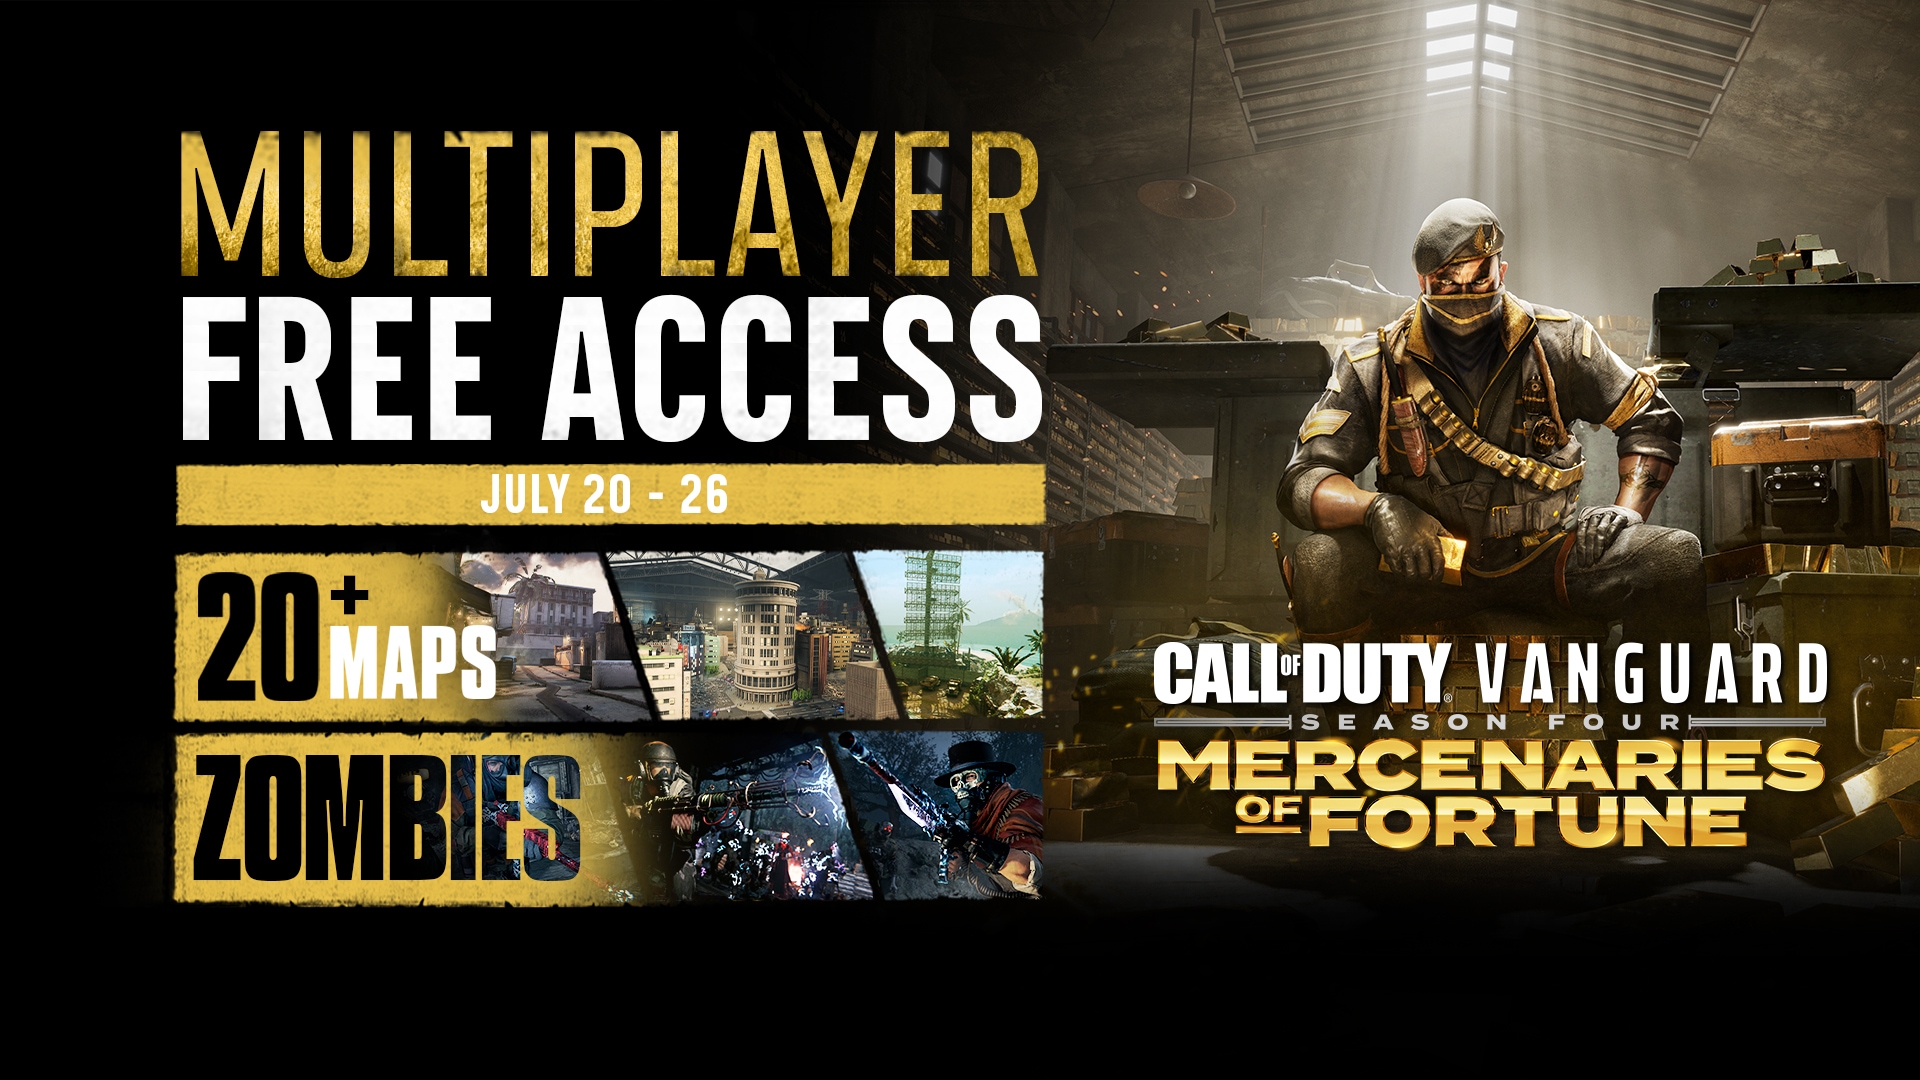 Call of Duty: Vanguard One Week Free Access to Multiplayer and Zombies